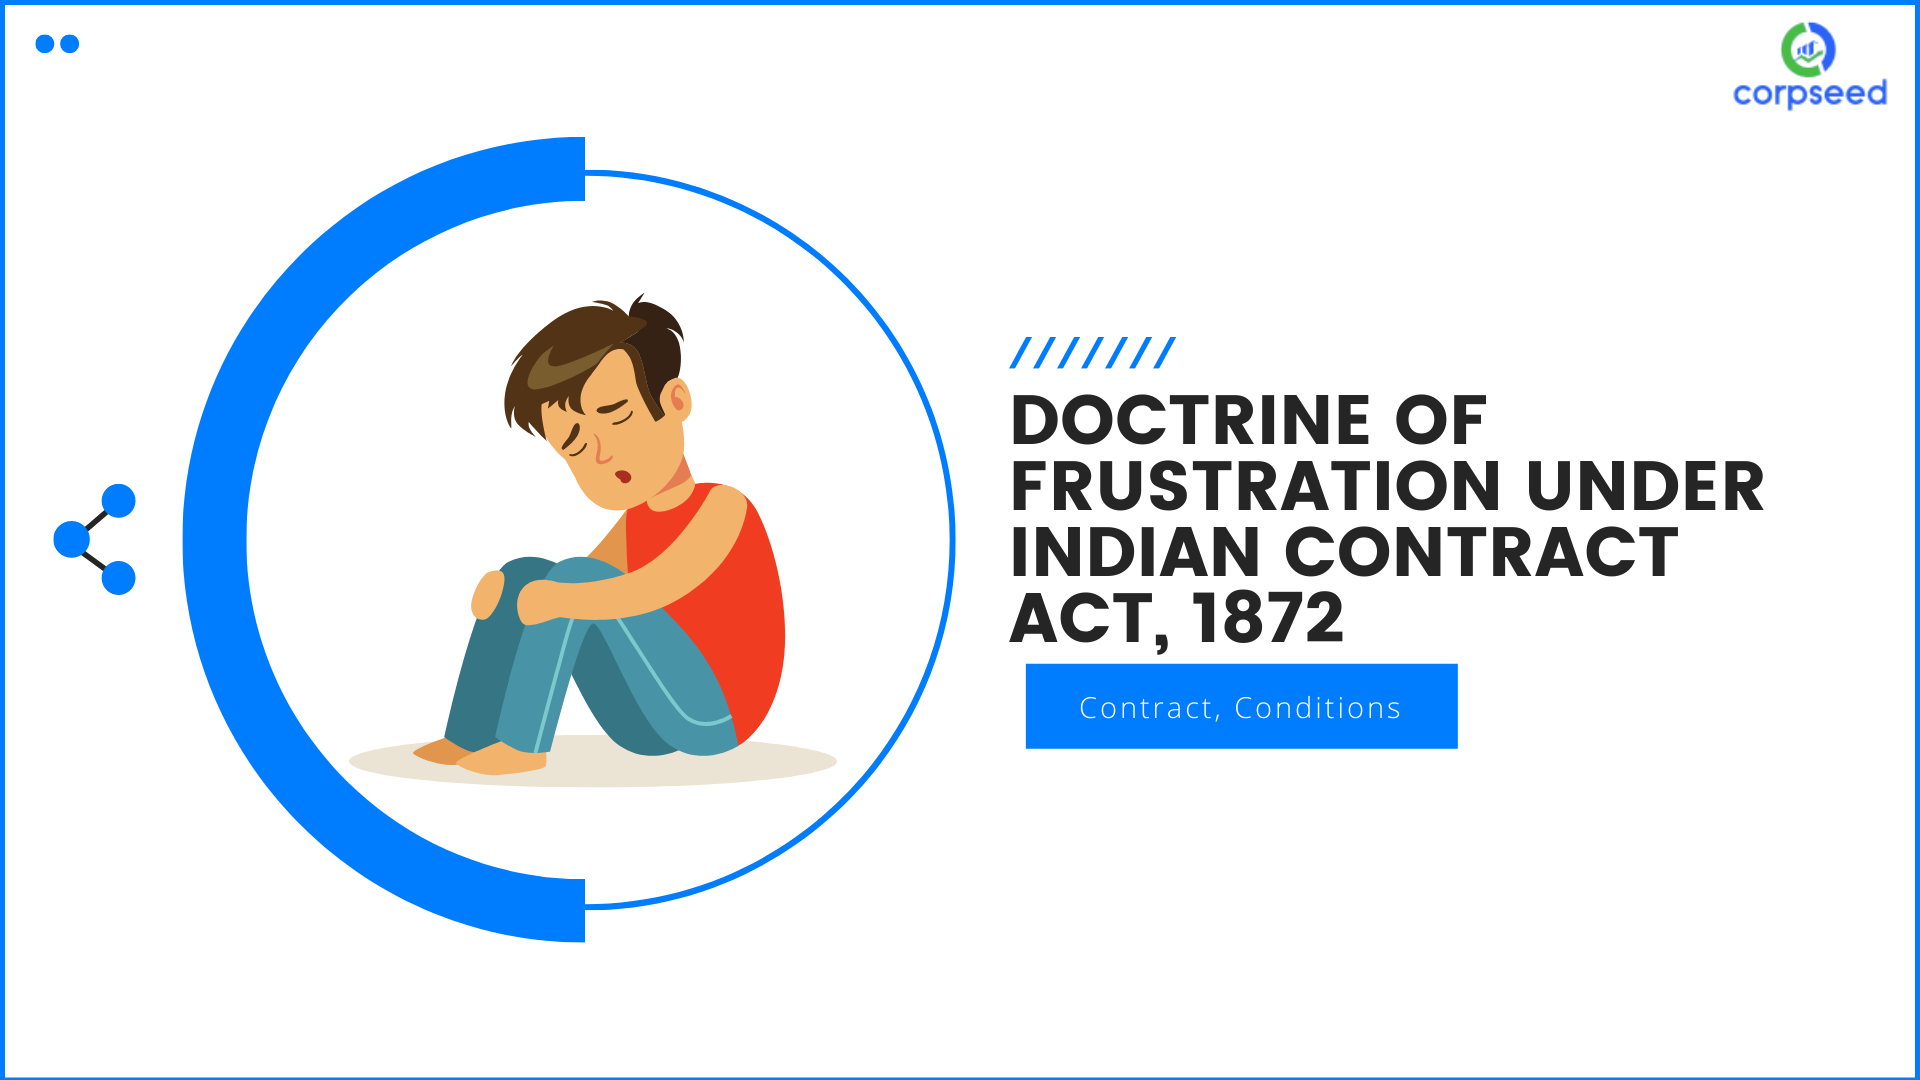 doctrine-of-frustration-under-section-56-of-indian-contract-act-1872-corpseed.png